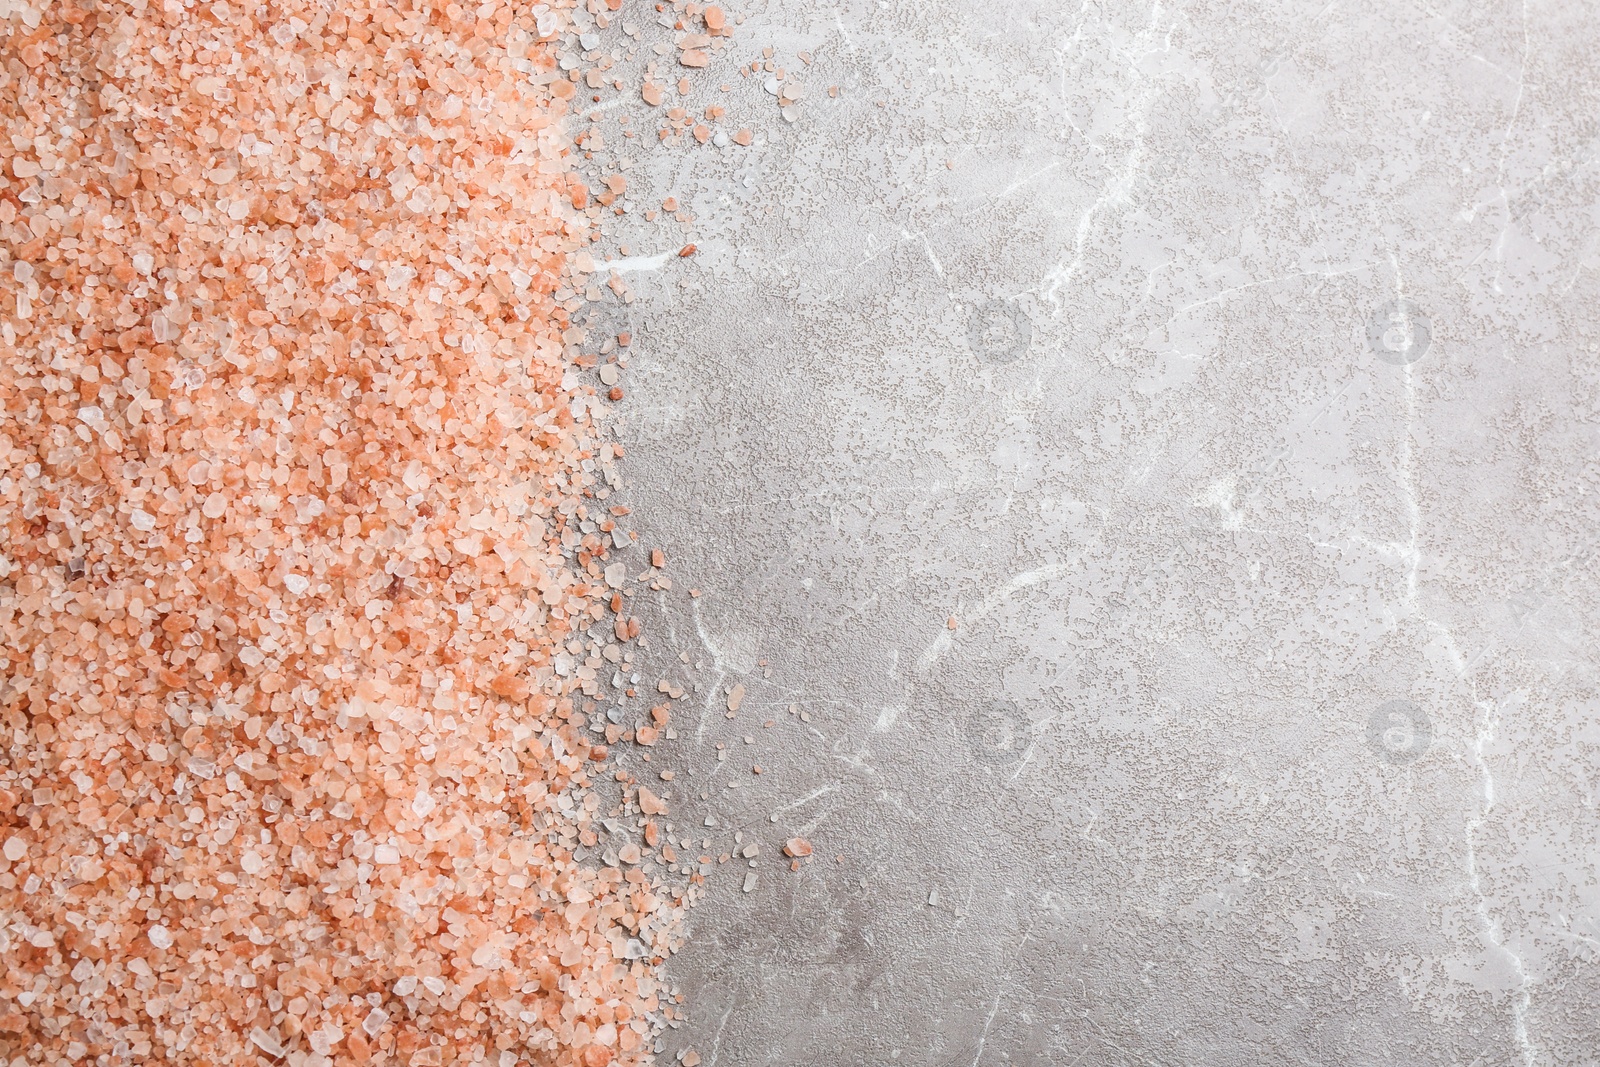 Photo of Pink himalayan salt on grey table, flat lay. Space for text